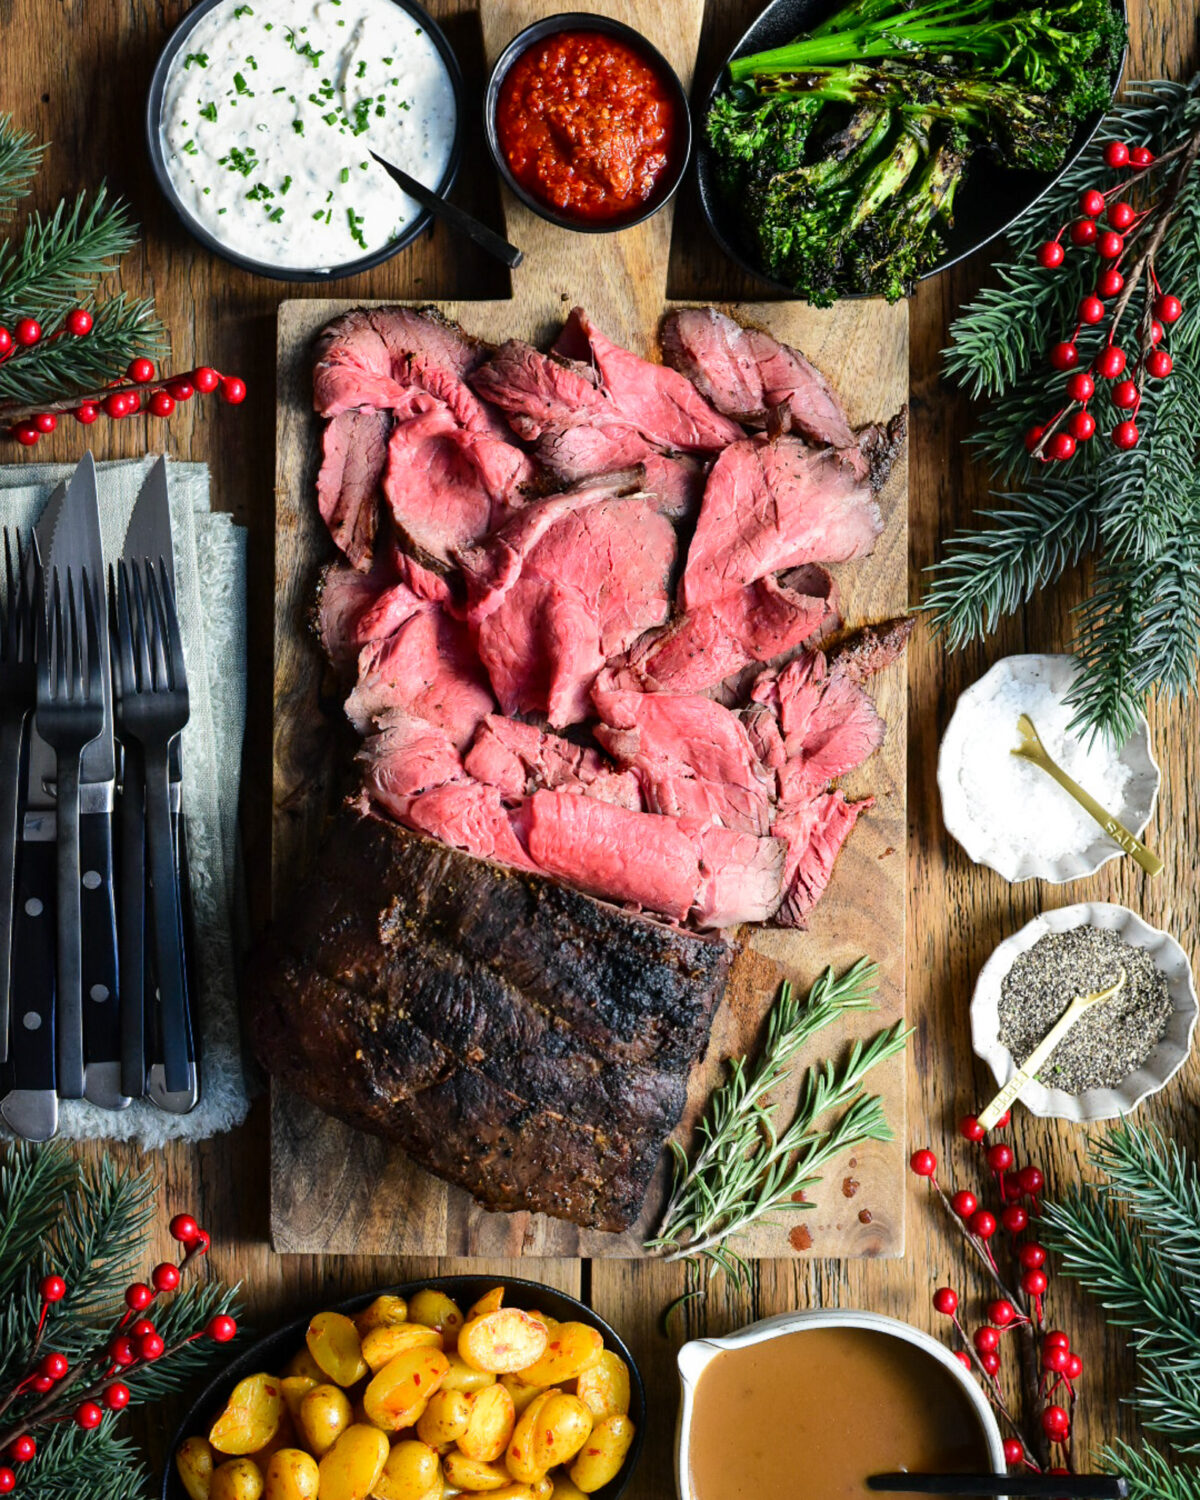 A large medium rare roast beef on a cutting board. Half of the roast is sliced into thin pieces. Served with gravy, potatoes, horseradish sauce and broccolini.